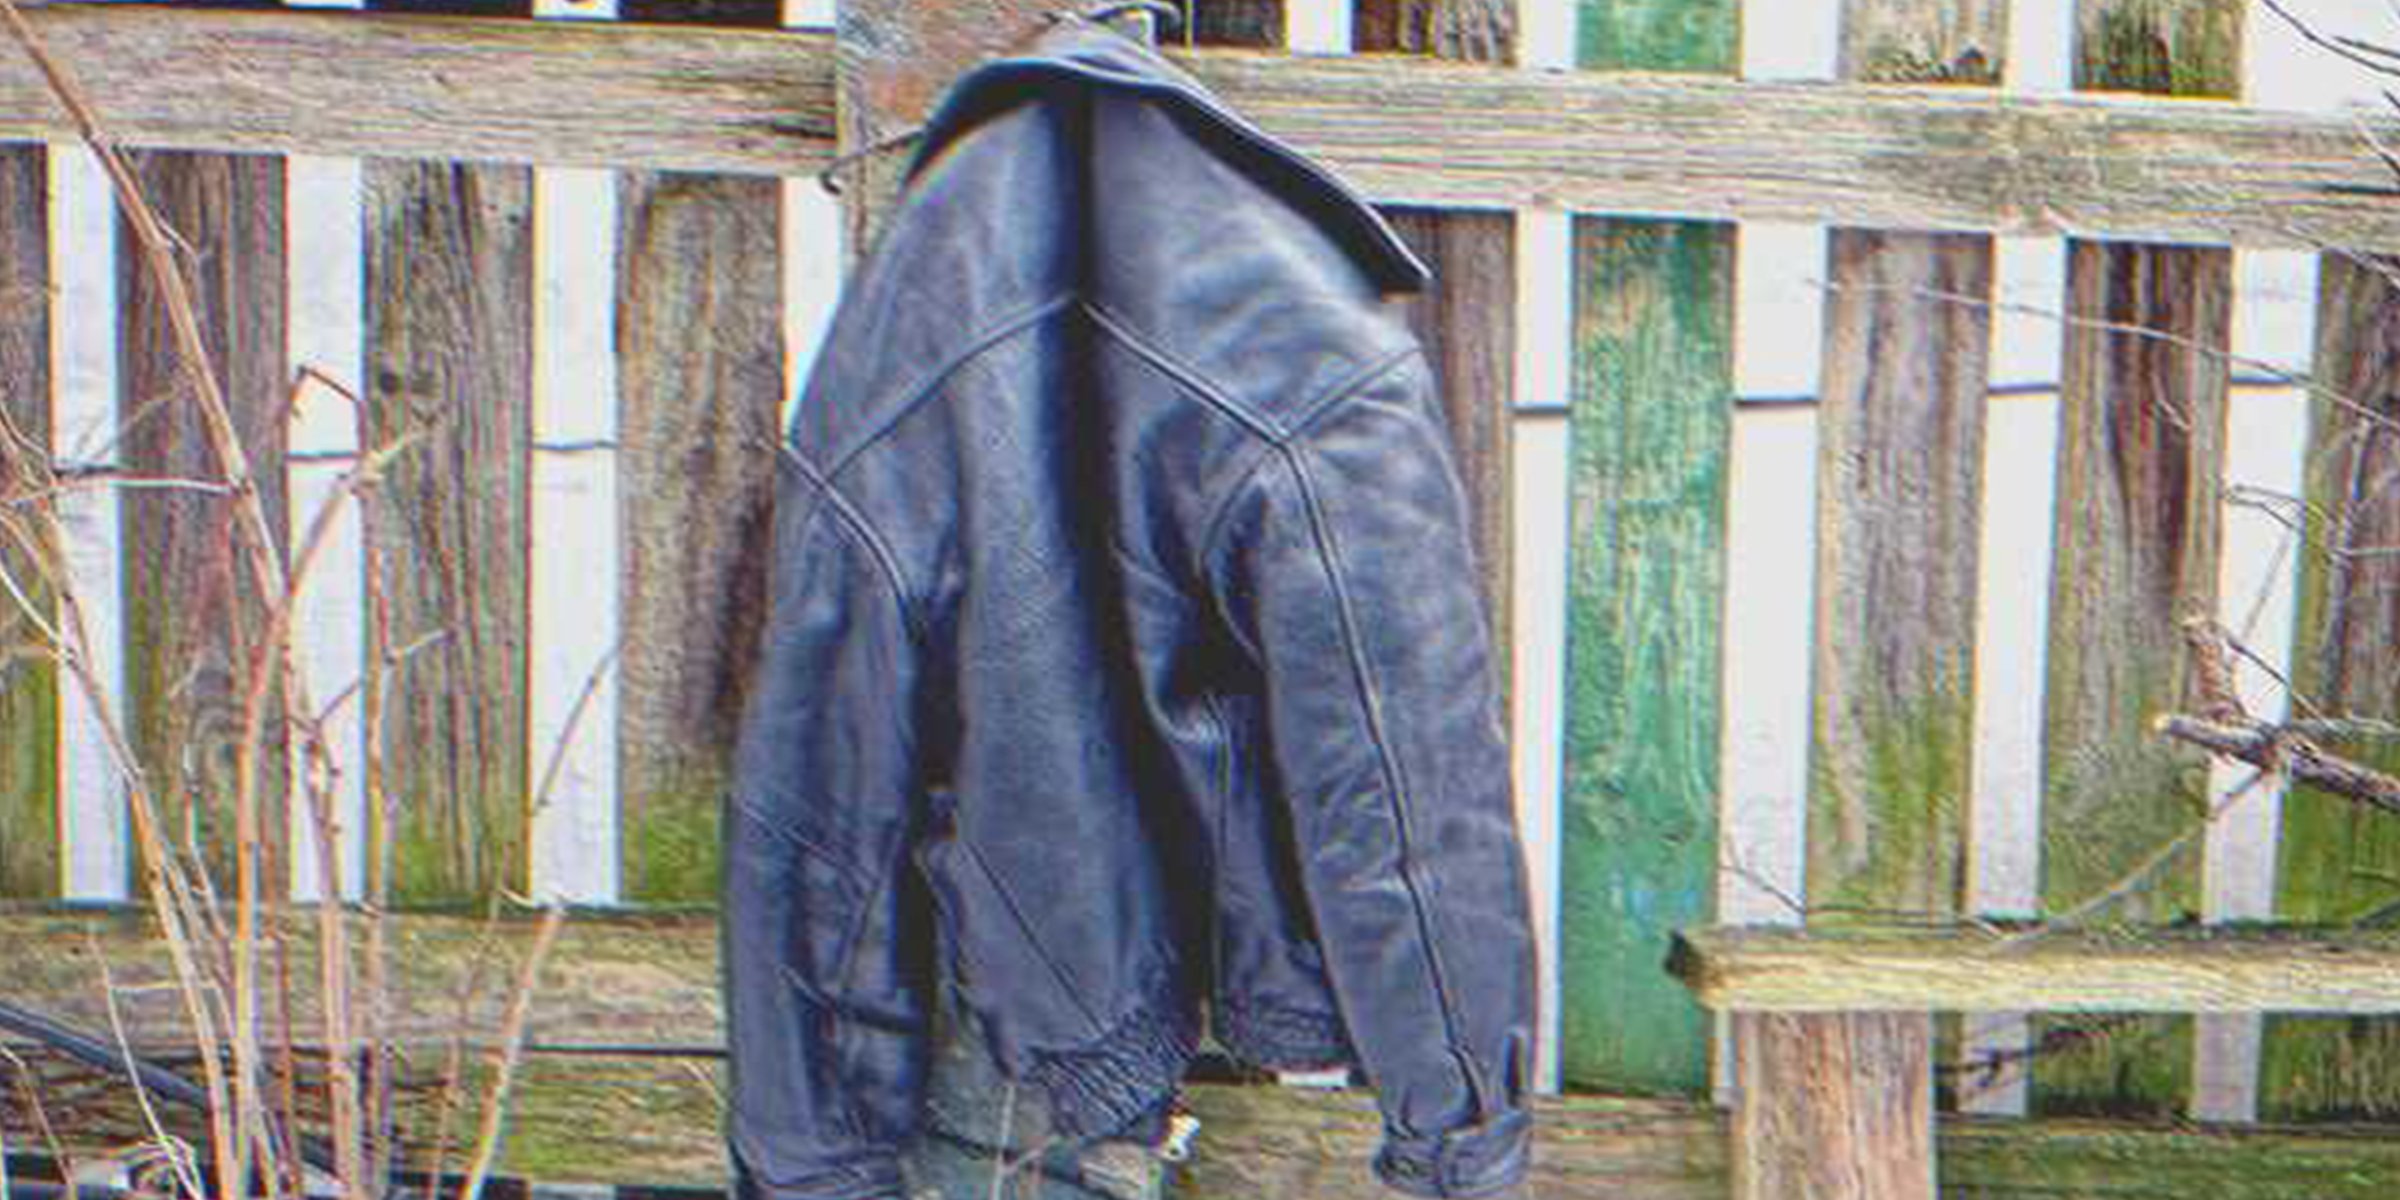 An old leather jacket | Source: Shutterstock